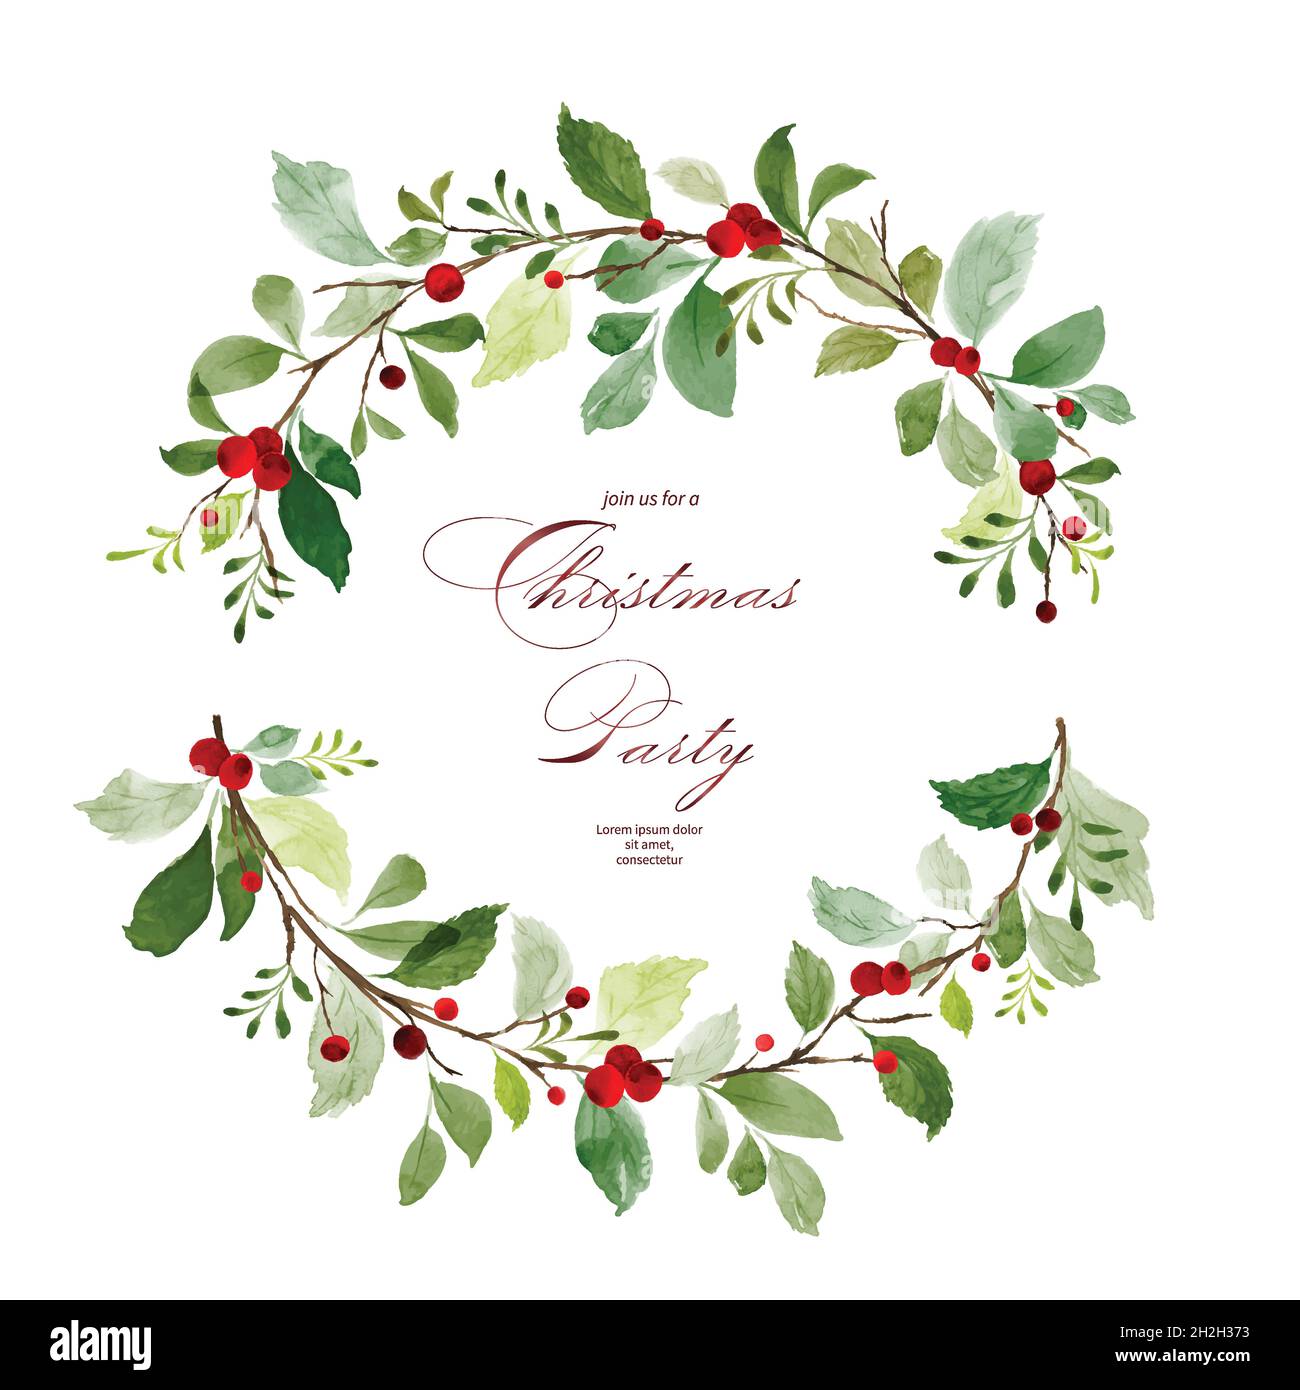 Merry Christmas with berry wreath watercolor. Bouquet of holly leaves and pine branches watercolor hand-painted. Suitable for Christmas cards design, Stock Vector